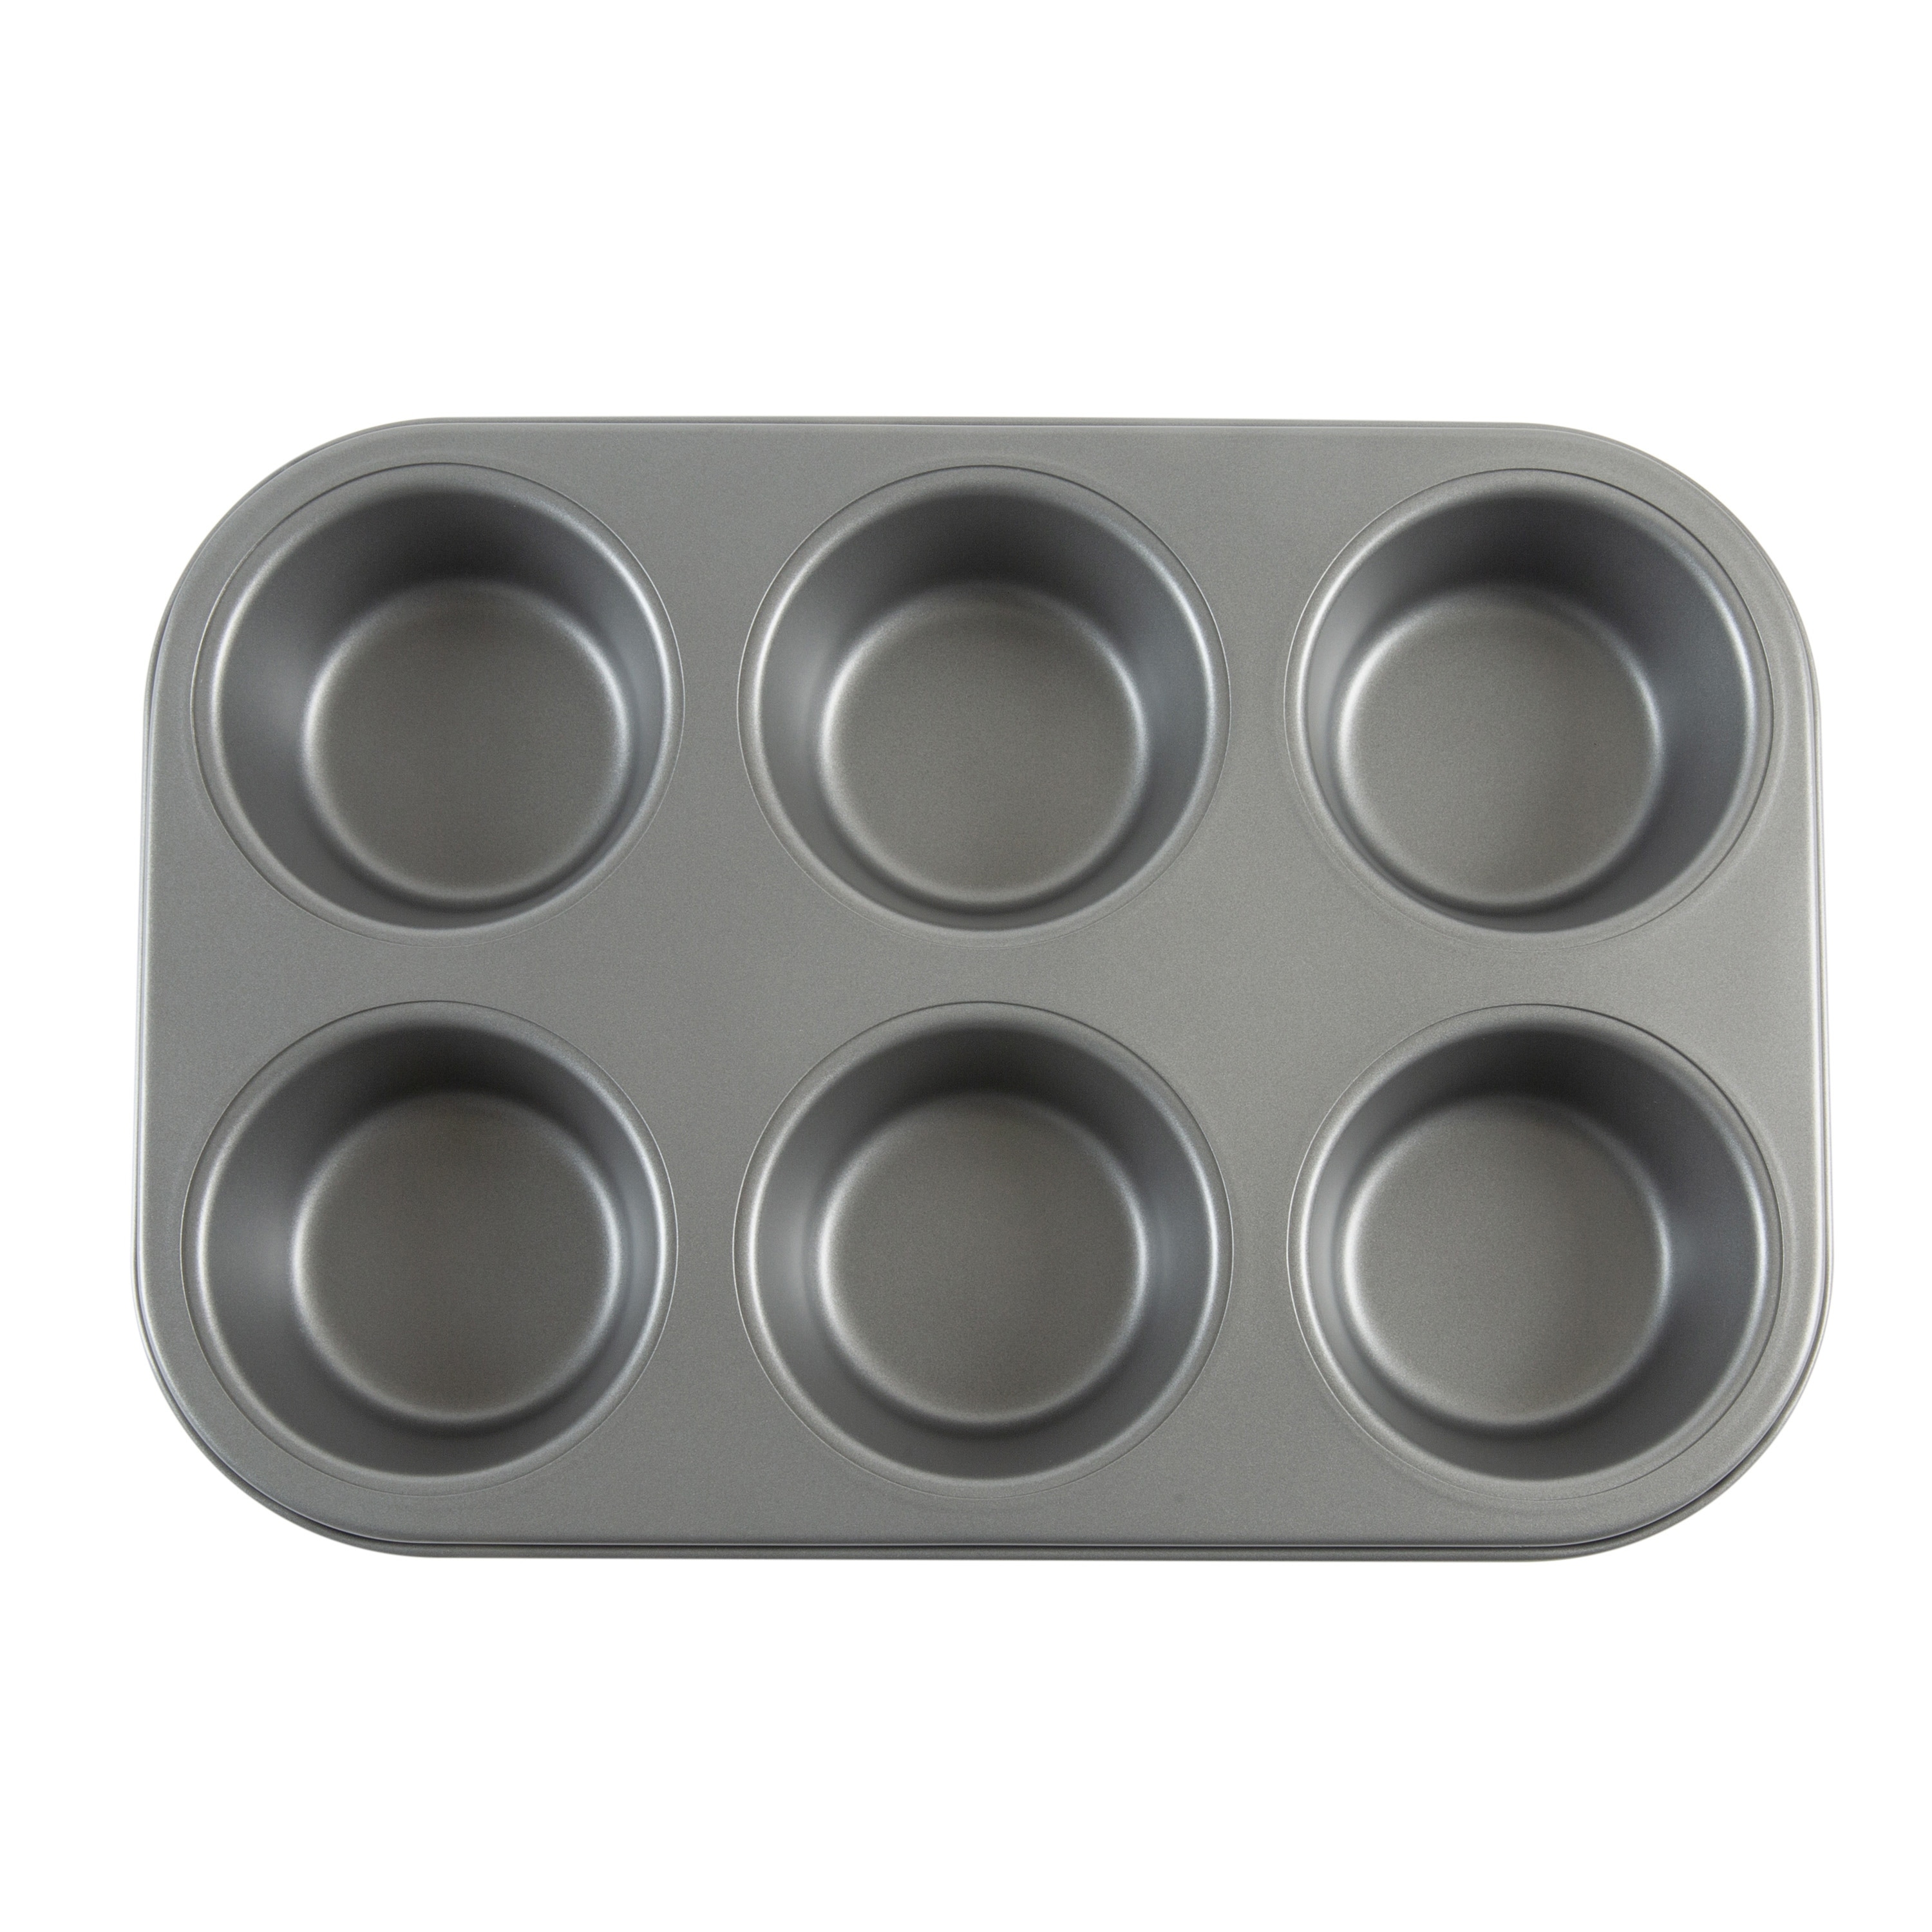 https://ak1.ostkcdn.com/images/products/is/images/direct/afe9b312860f97b40176bef085fcef698ea7c066/Kitchen-Details-6-Cup-Texas-Muffin-Pan.jpg